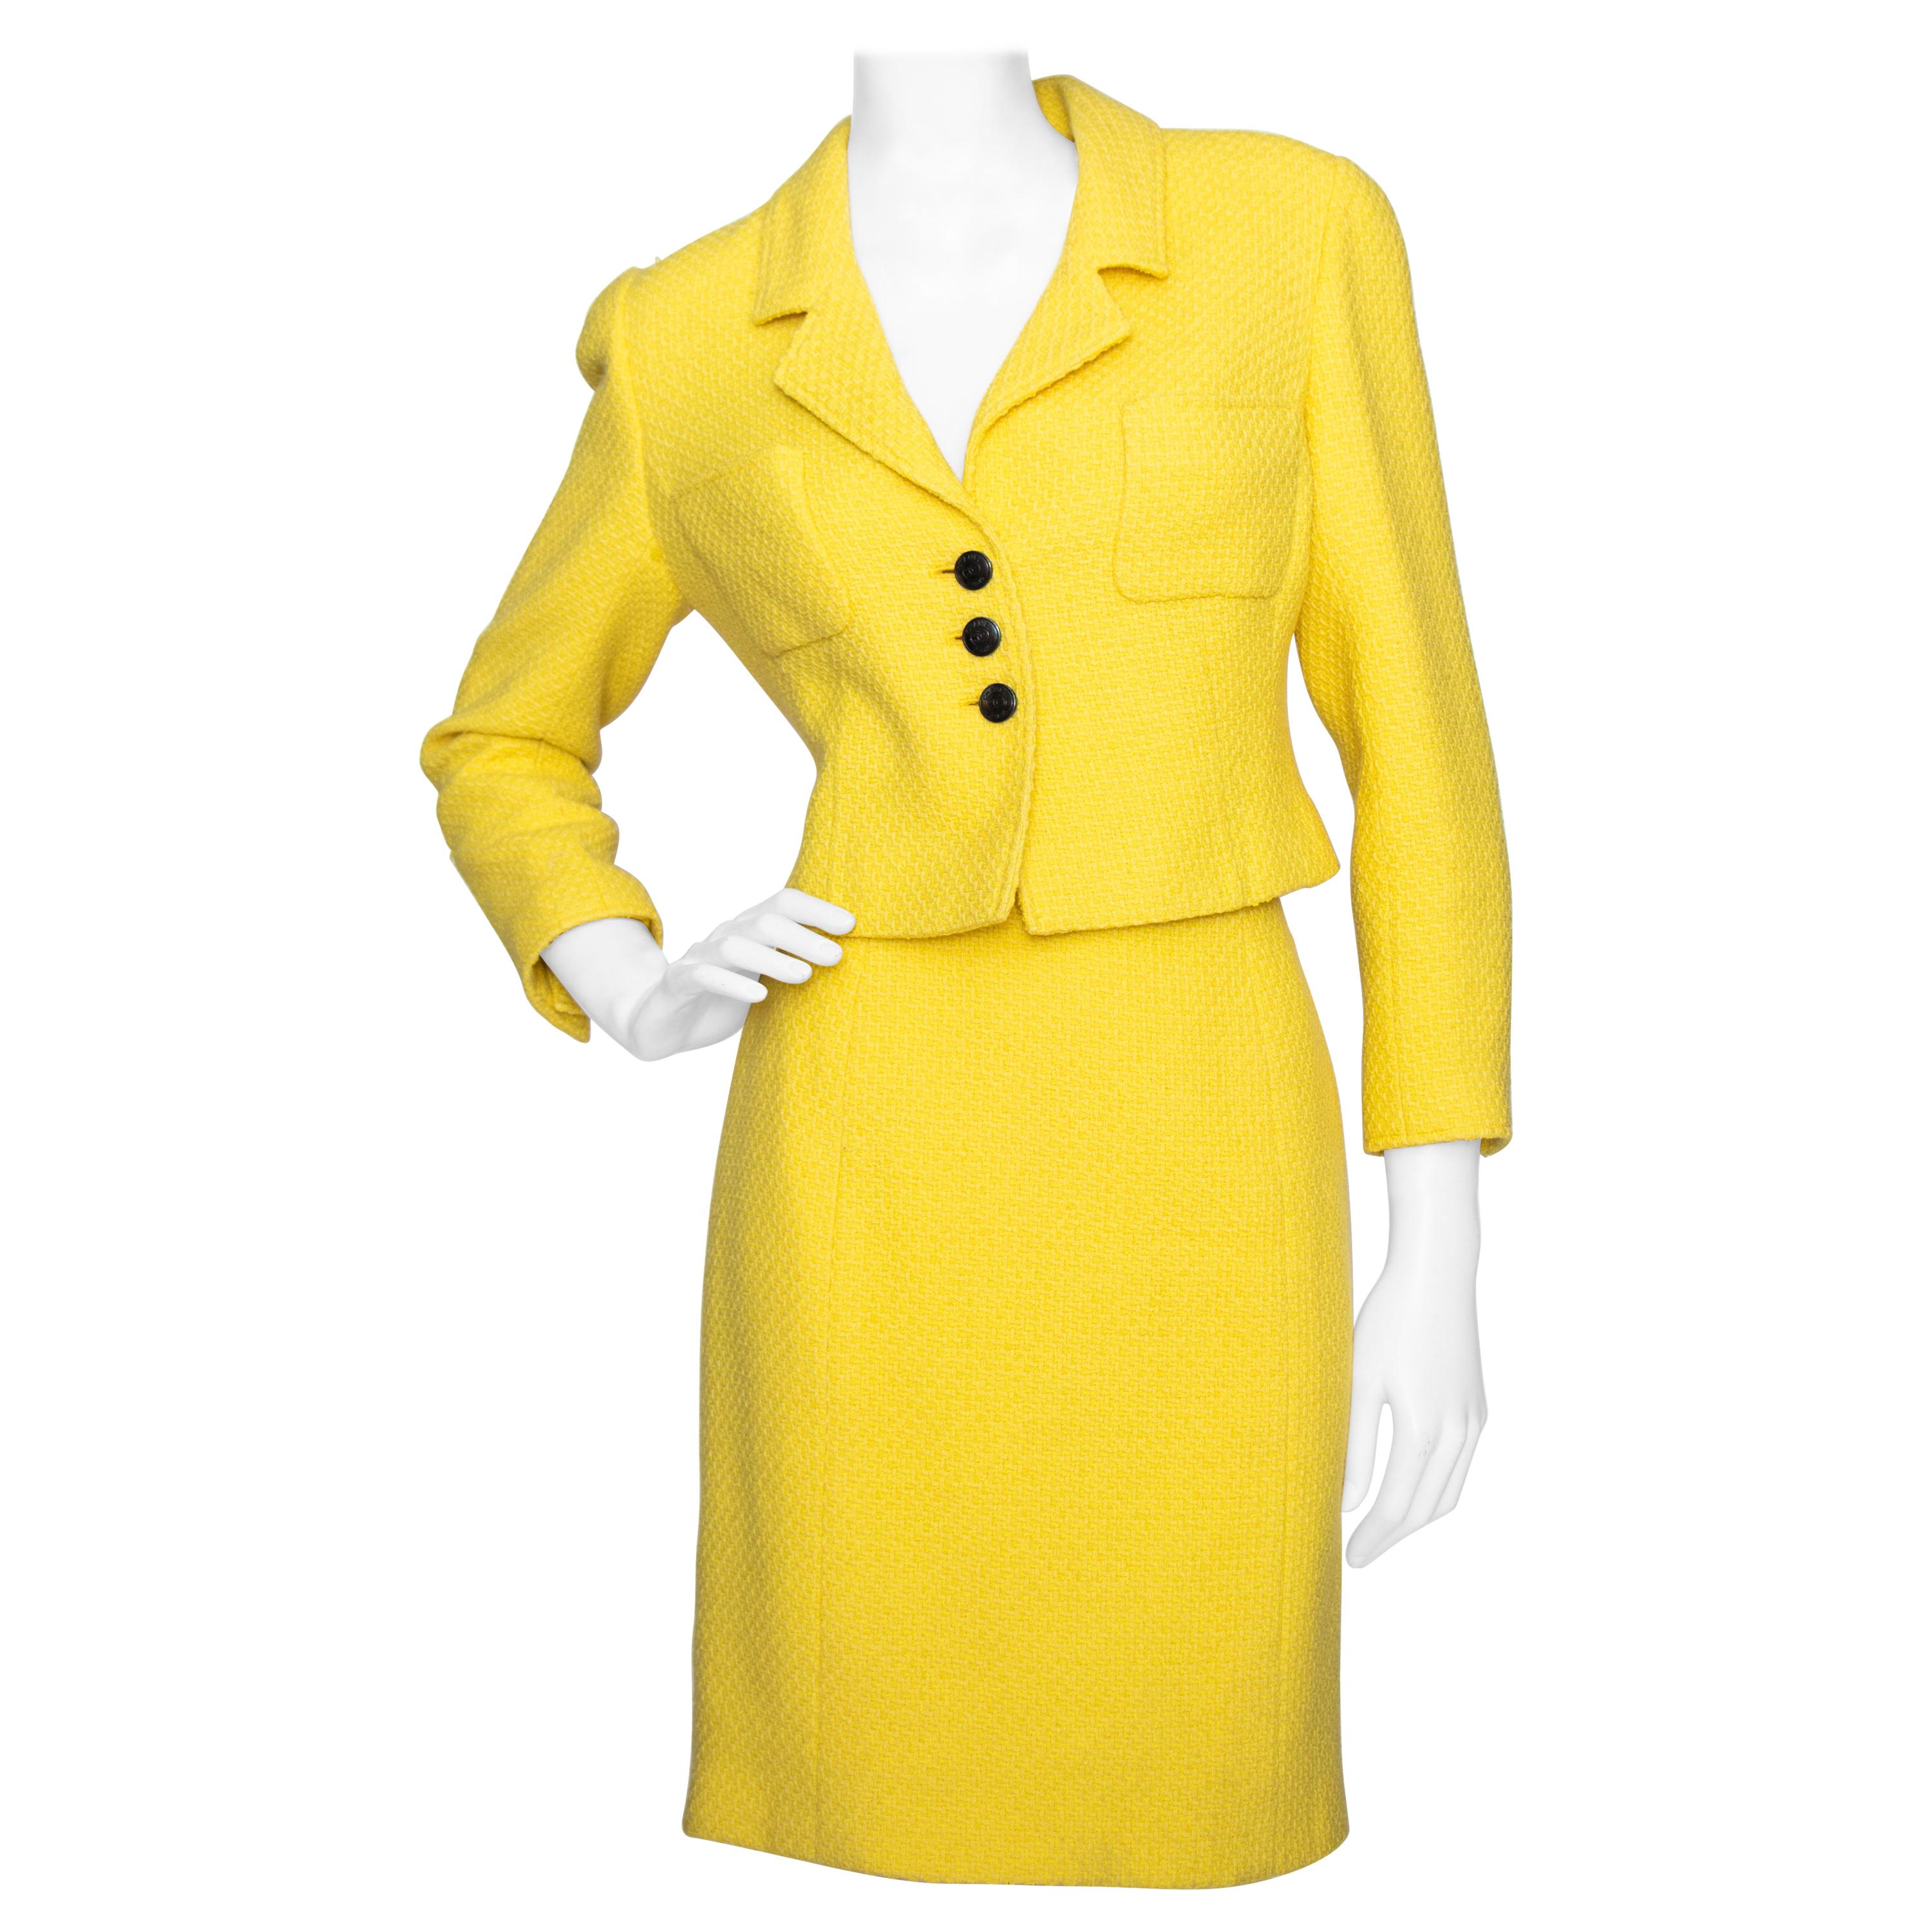 A Vintage 1997 Cruise Collection Chanel Canary Yellow Skirt Suit For Sale